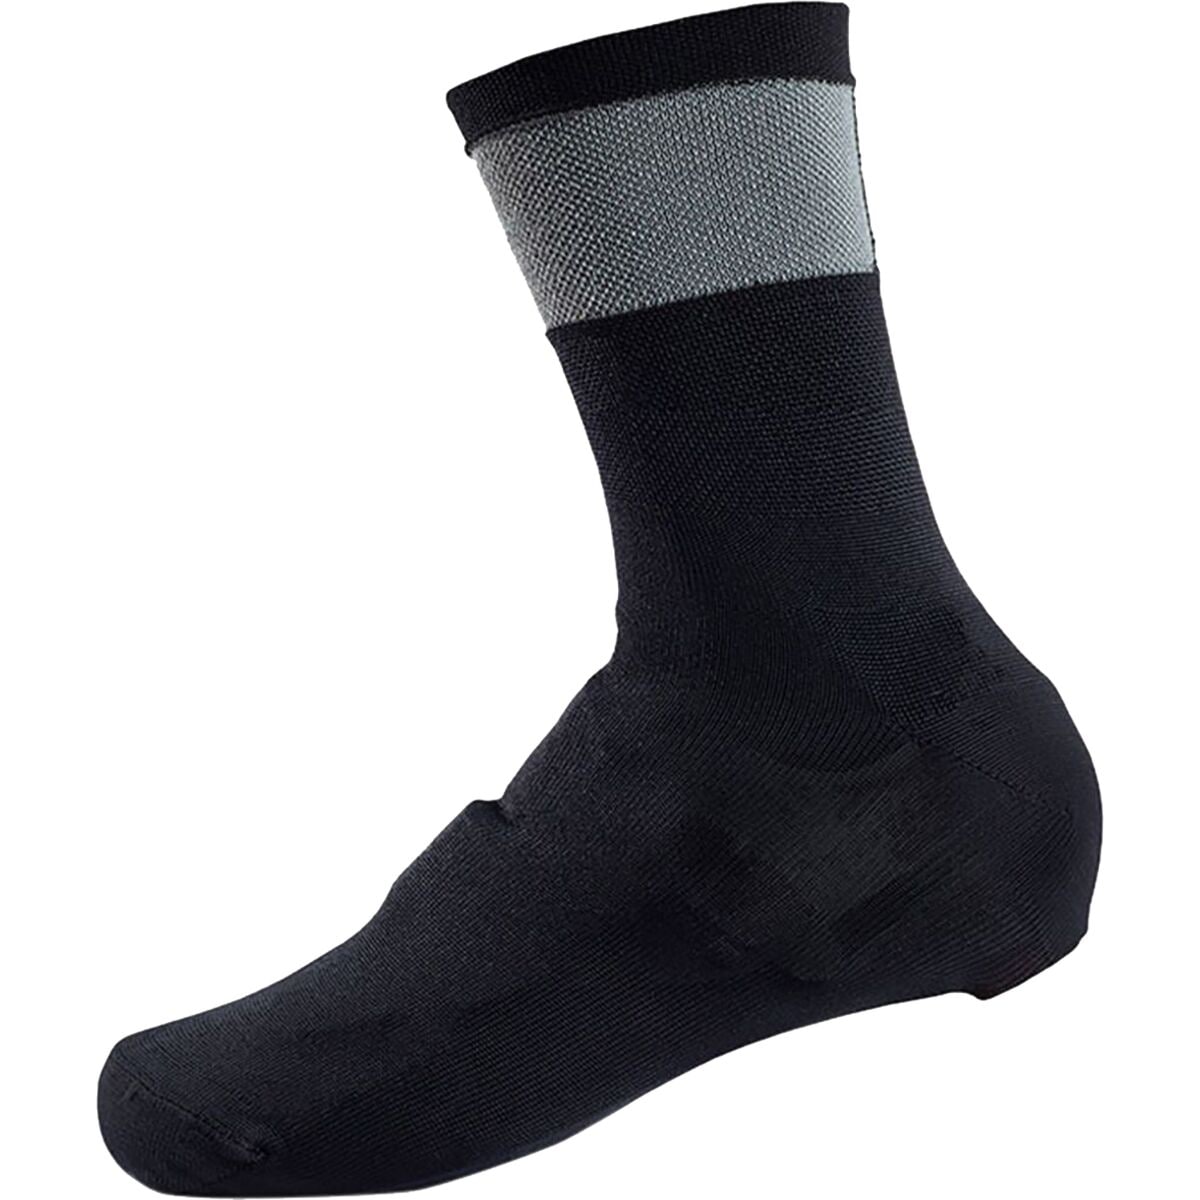 Giro Cycling Overshoes 2016 Knit Shoe Covers With Cordura Highlight Black S 